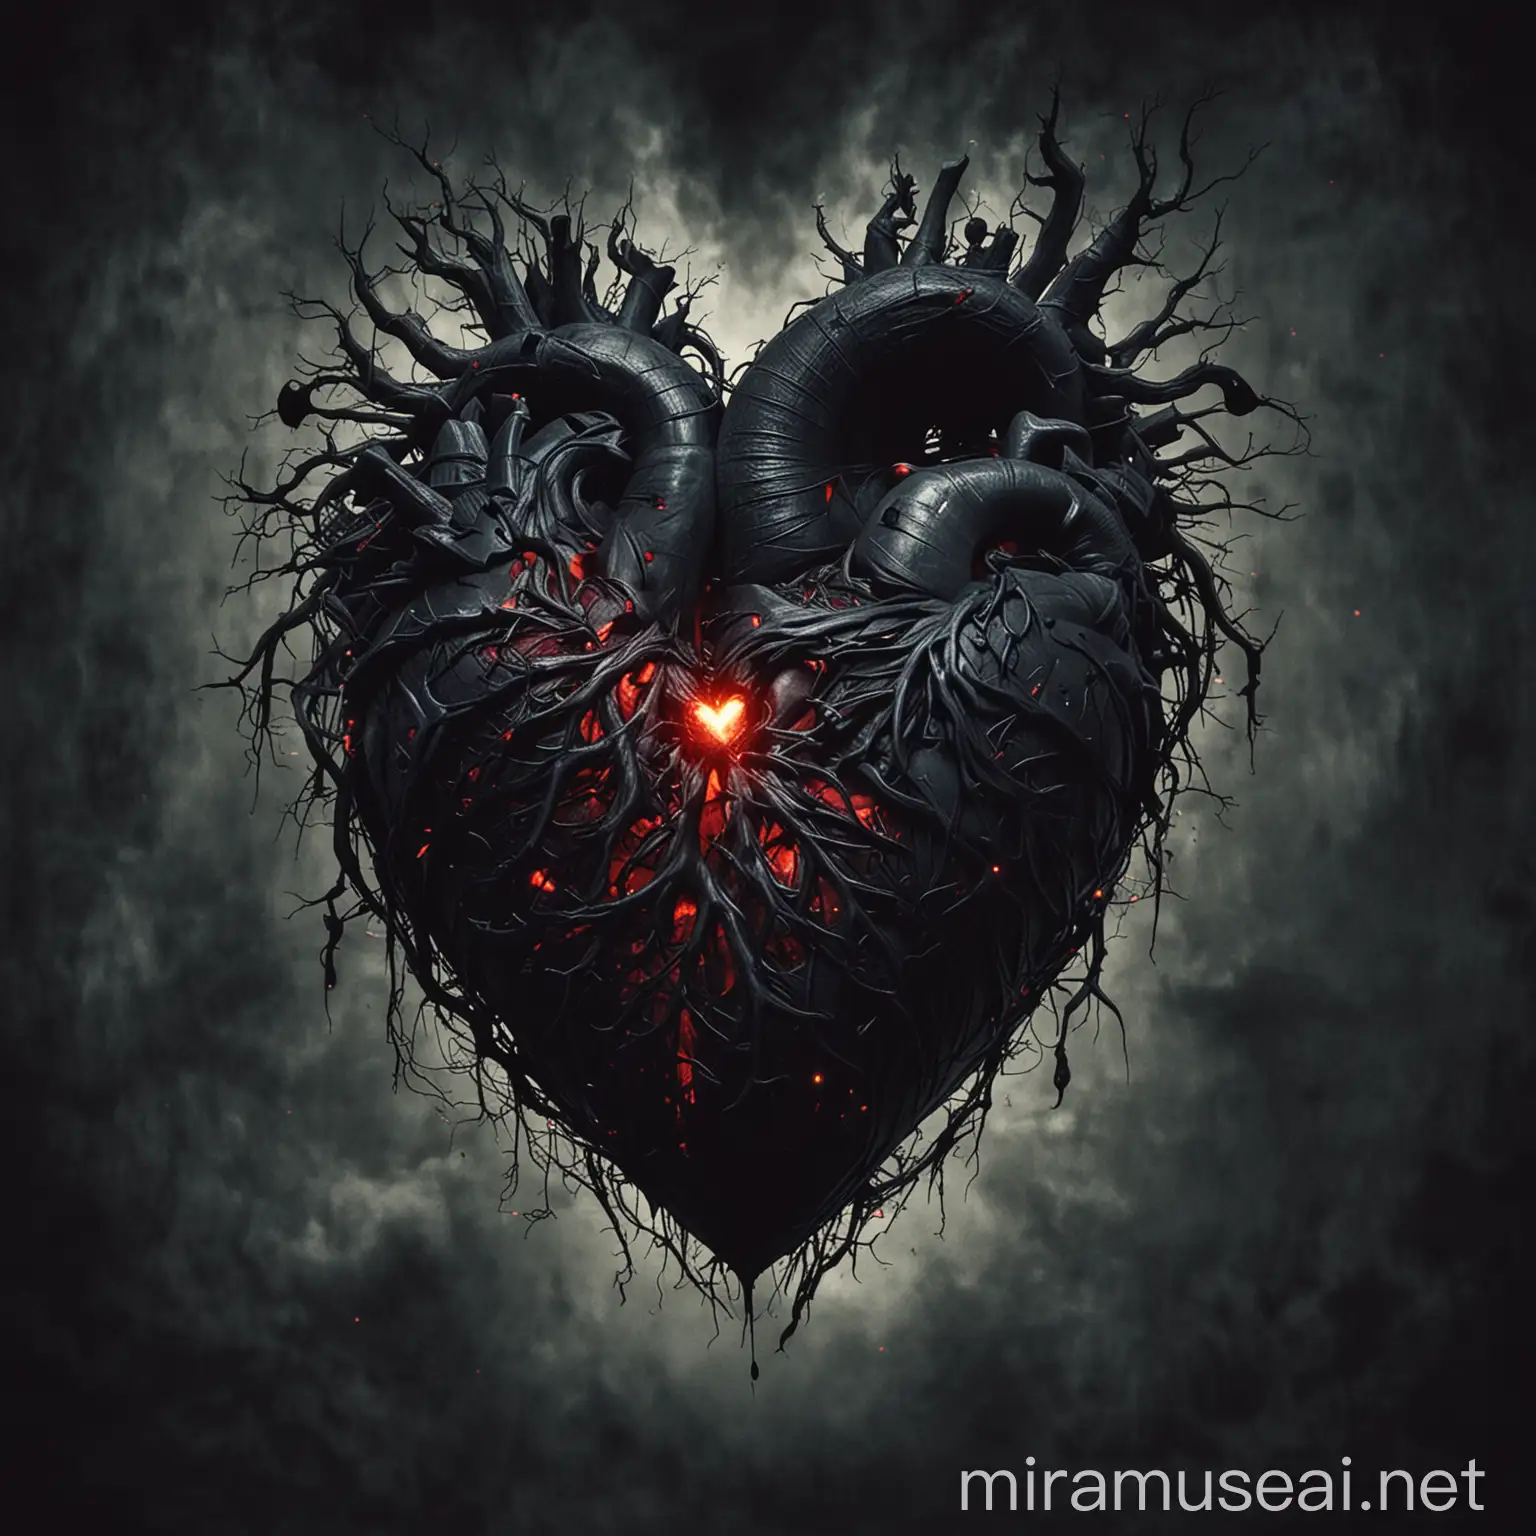 Heart made of darkness